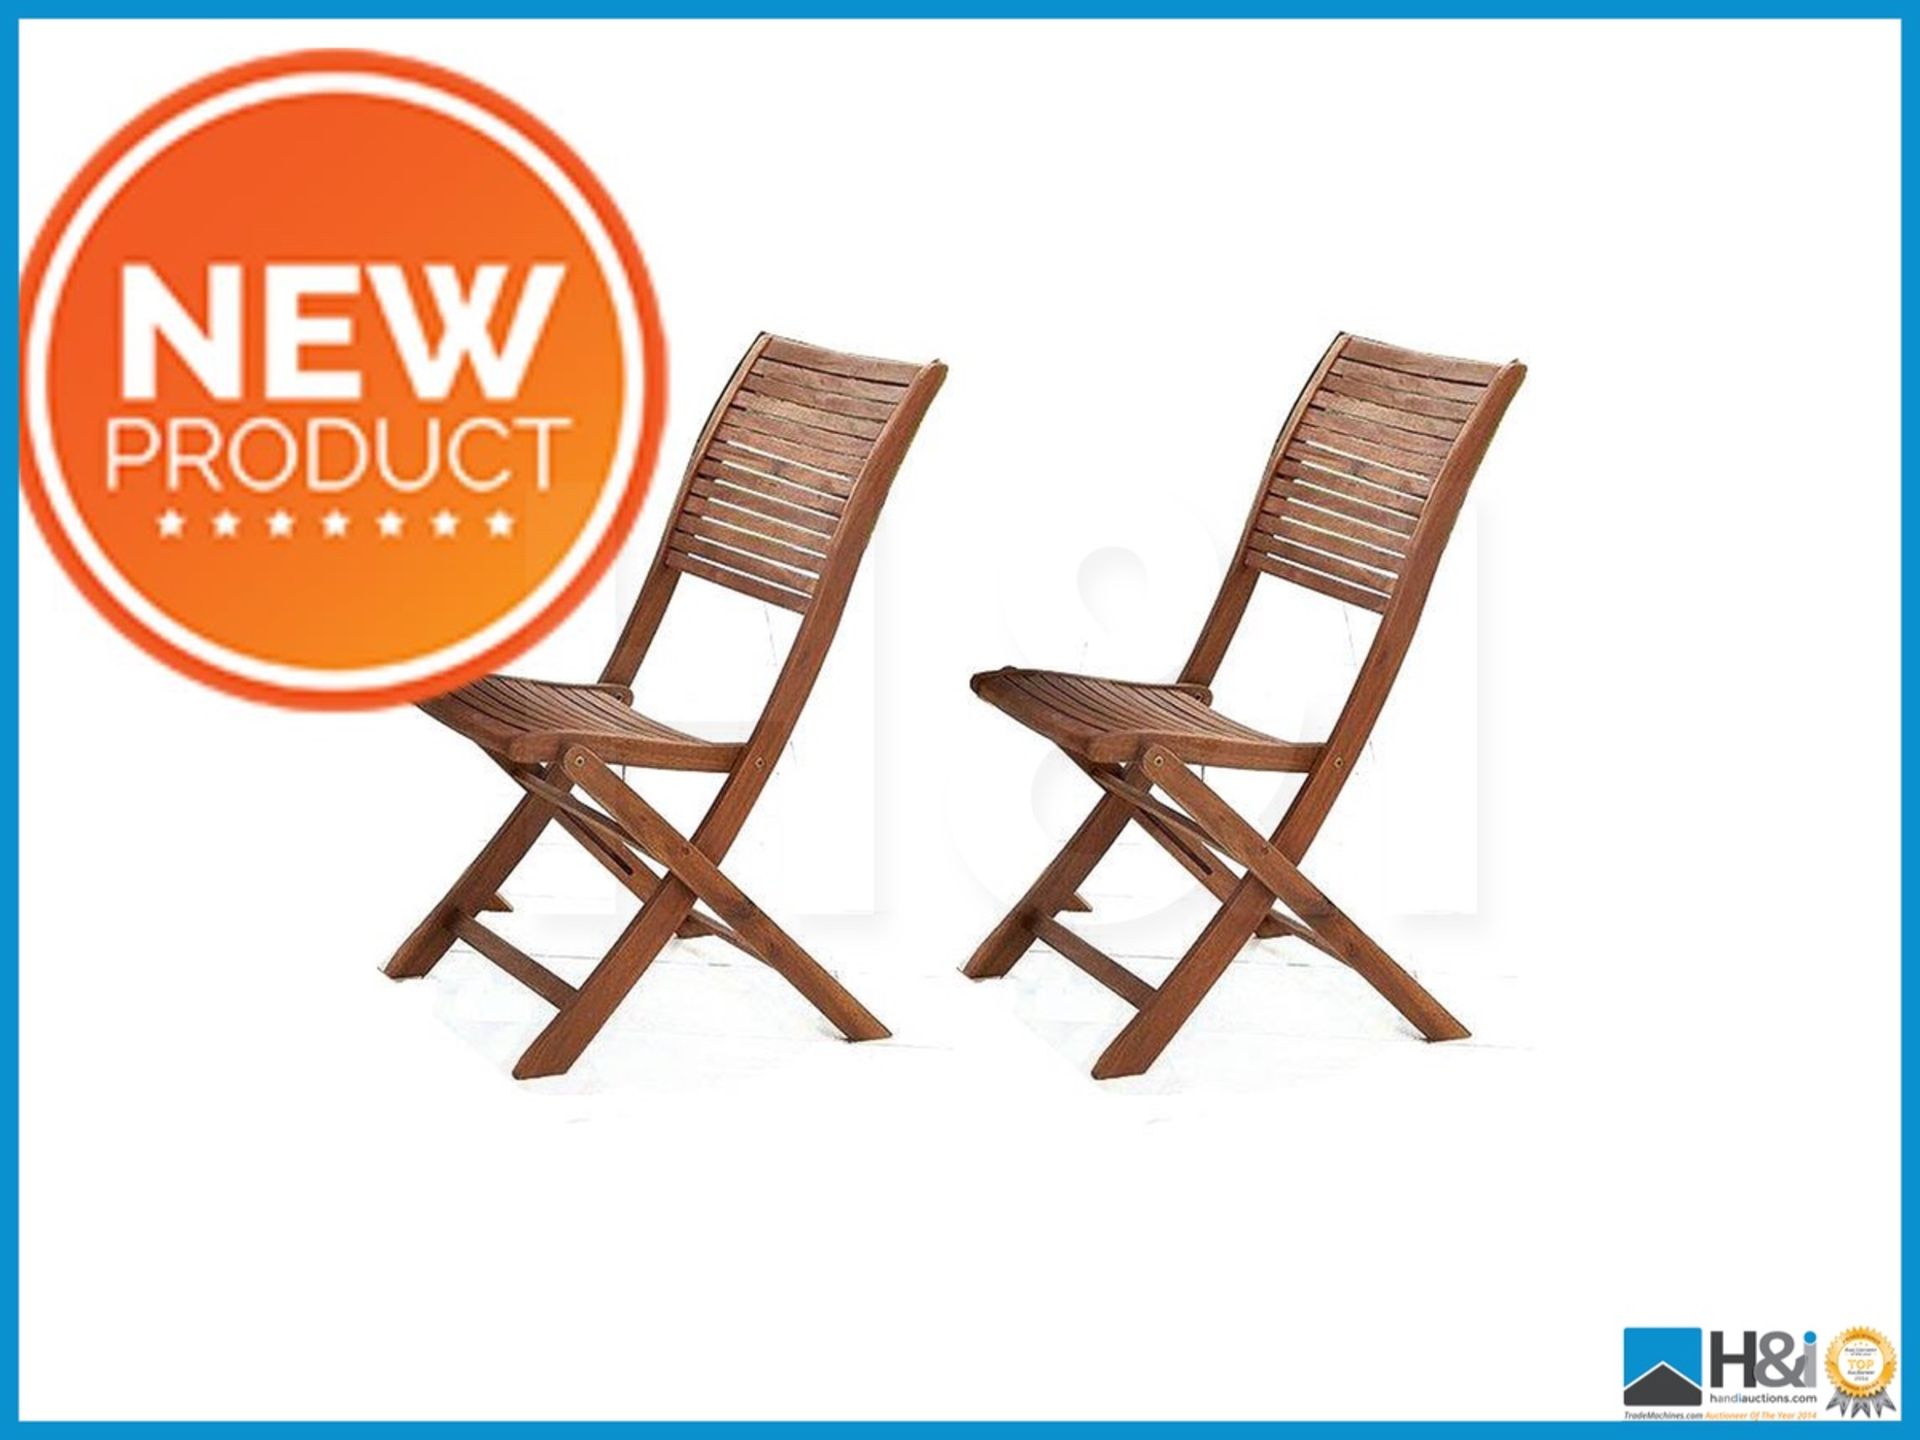 NEW IN BOX OAKLAND PAIR GARDEN CHAIRS [NATURAL] 96 x 50 x 57cm RRP £376 Appraisal: Viewing